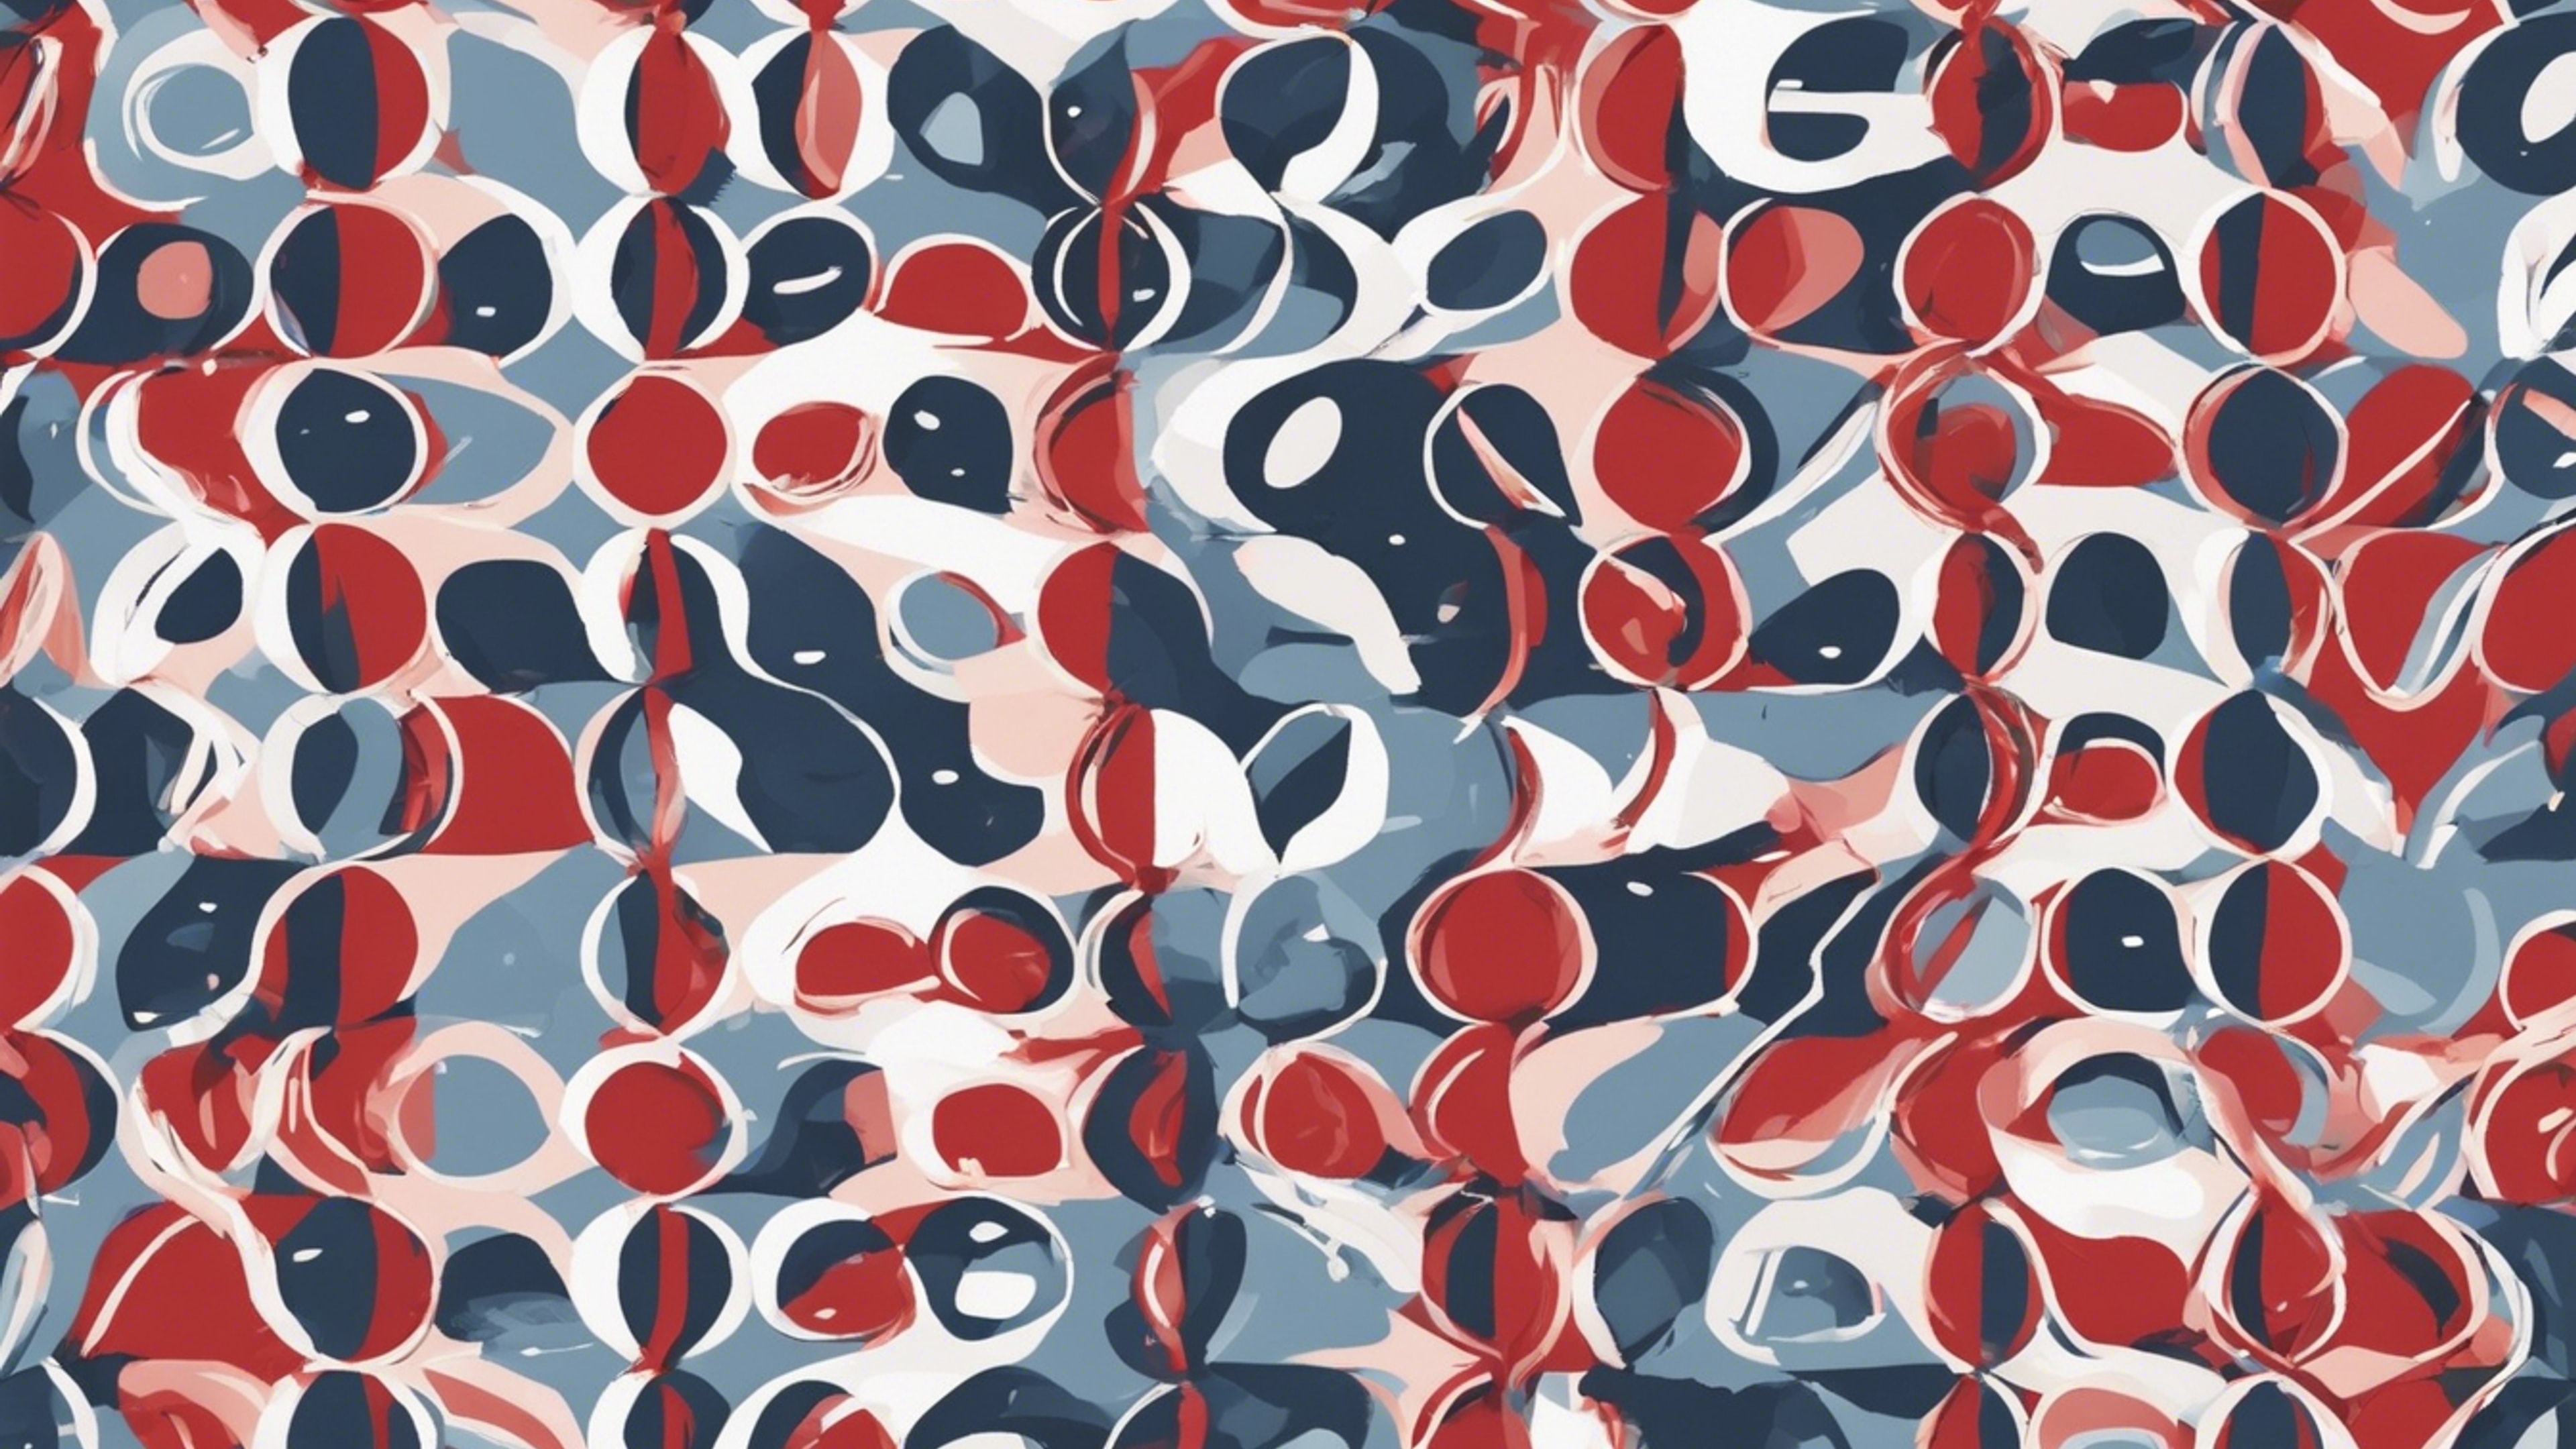 Simple and clean Scandinavian red and blue pattern. Tapeta[367ad8fa403444a2bdd2]